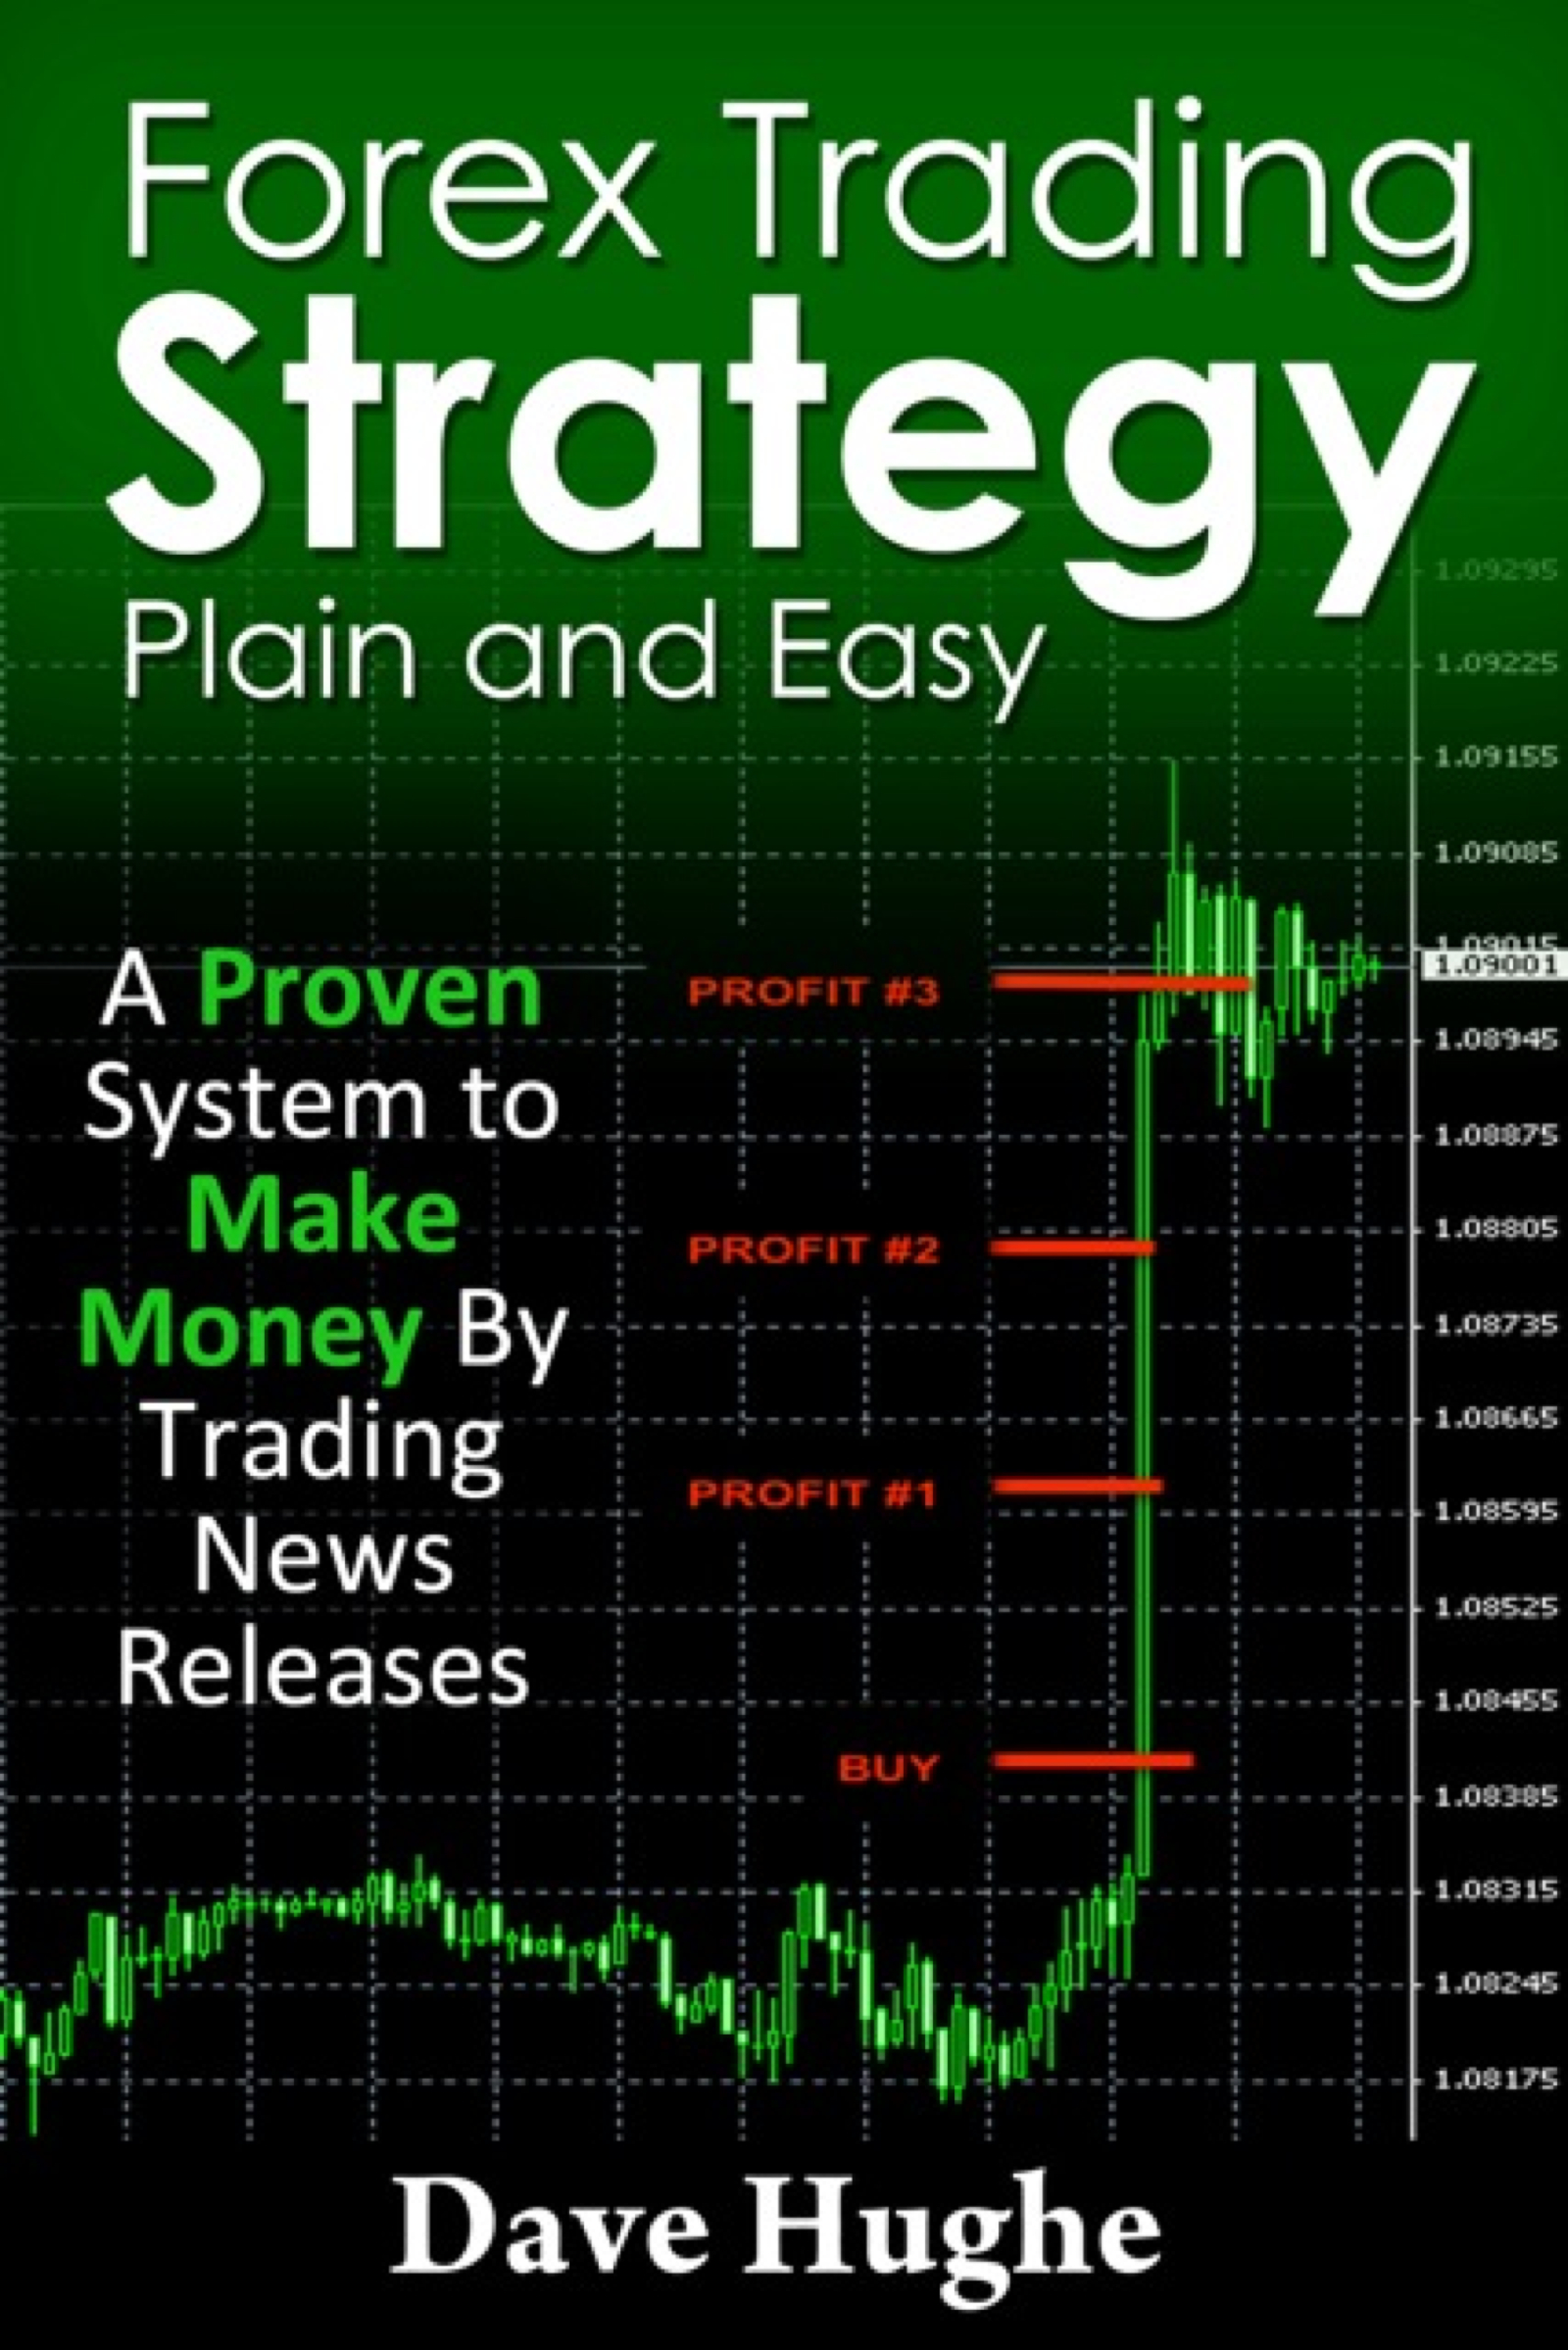 Forex Trading Strategy Plain And Easy An Ebook By Dave Hughe - 